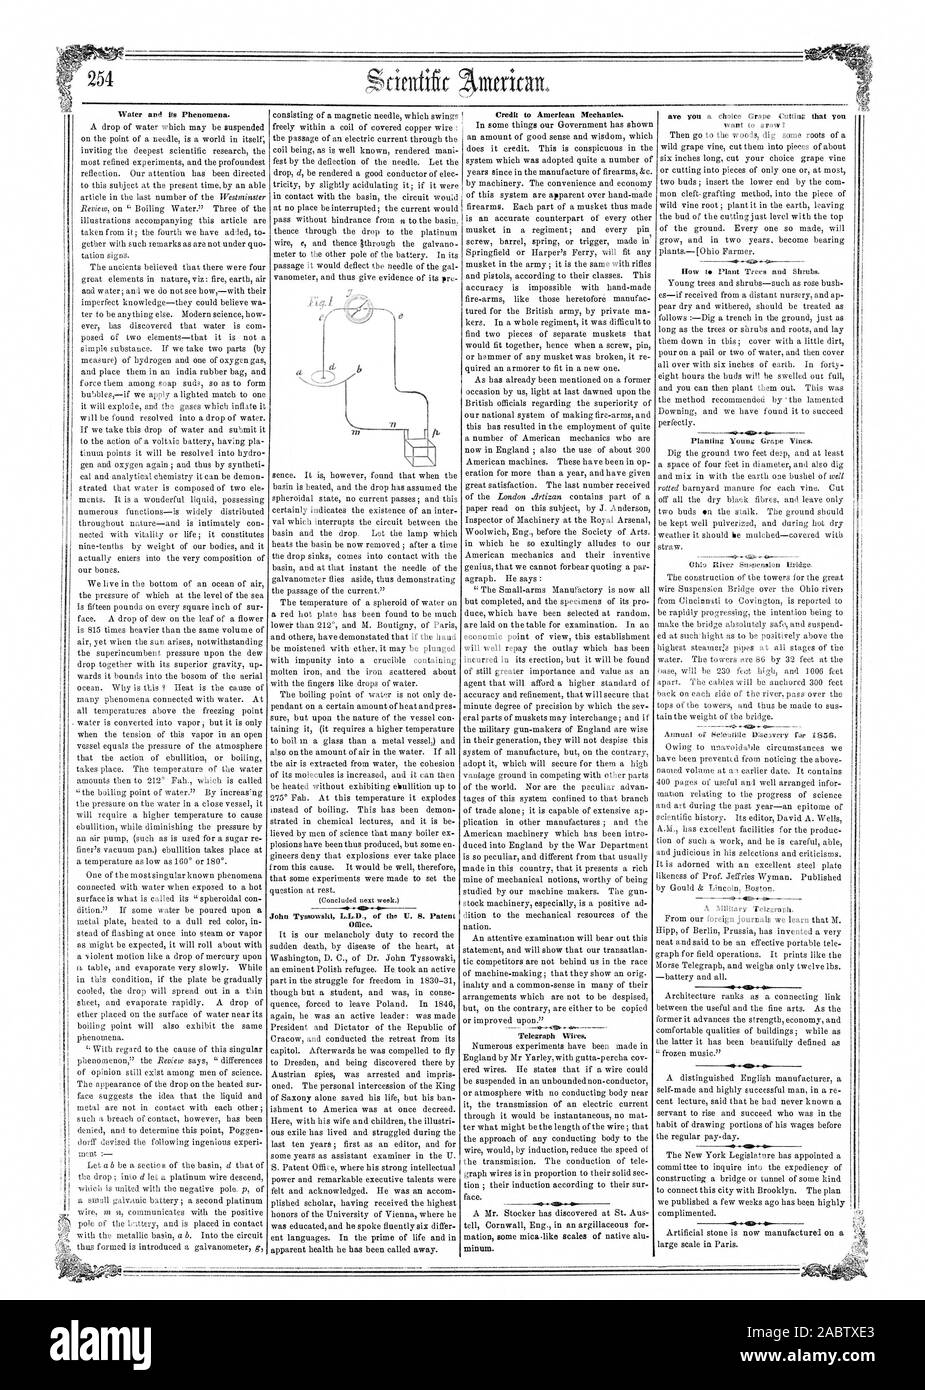 Water and its Phenomena. John Tyasowskl L.L.D. of the U. 8. Patent Office. Credit to American Mechanics. 050., scientific american, 1857-04-18 Stock Photo